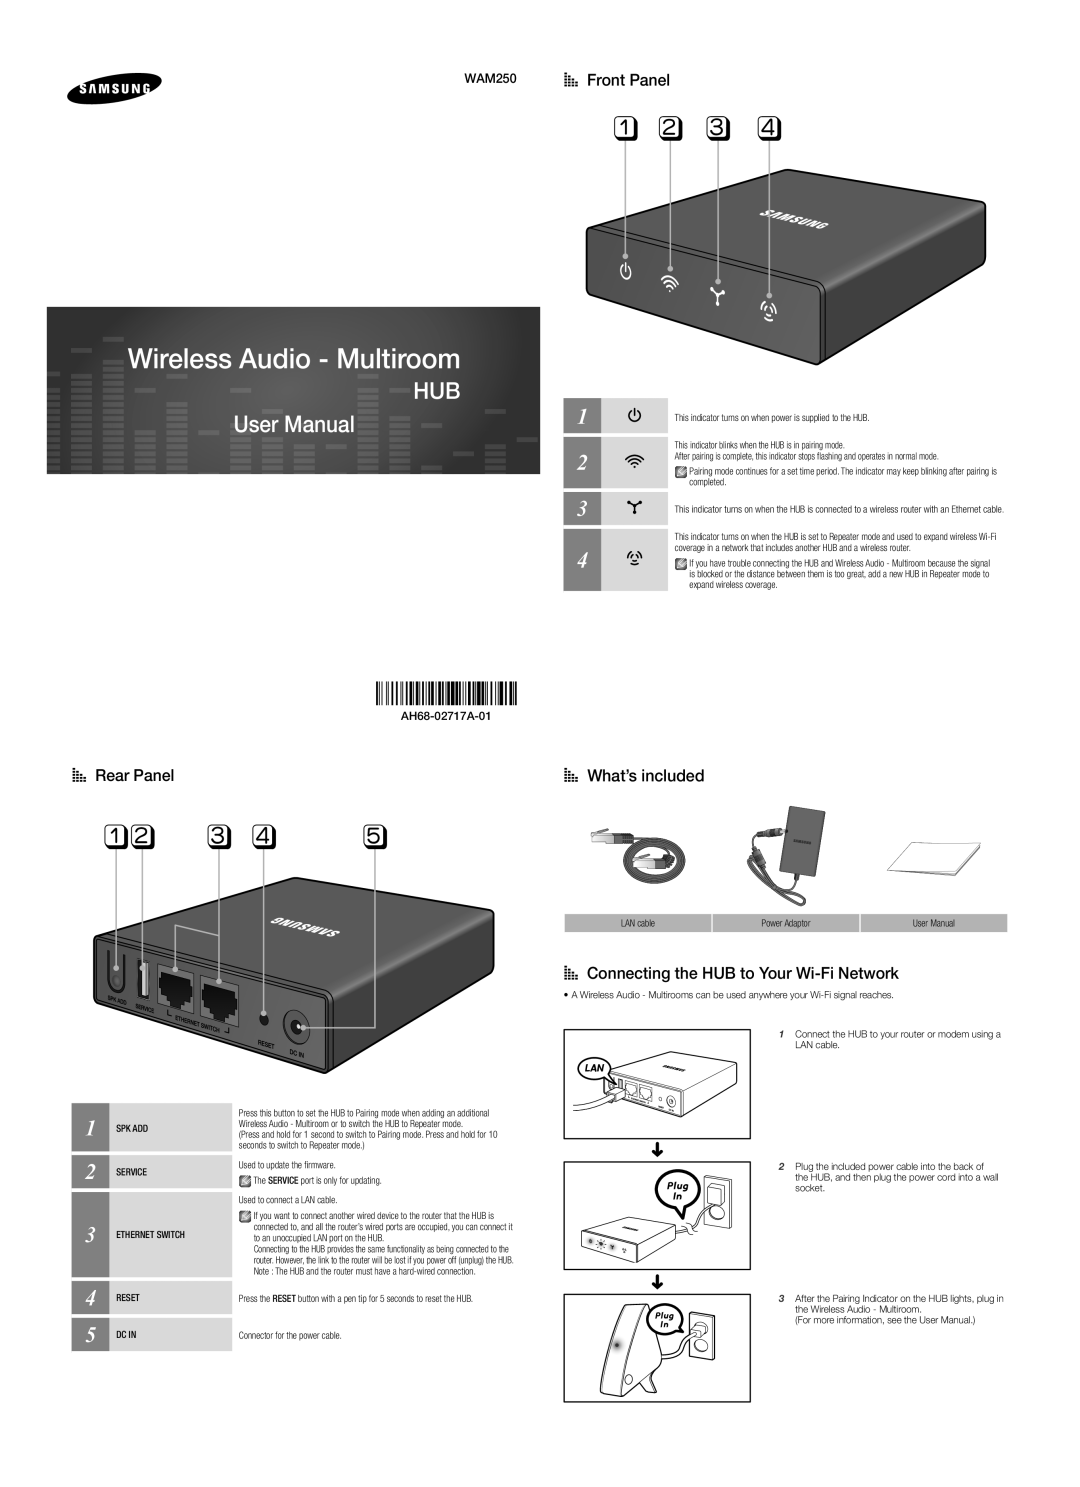 Samsung WAM250/ZF manual AA What’s included, AA Front Panel, AA Rear Panel, AA Connecting the HUB to Your Wi-Fi Network 